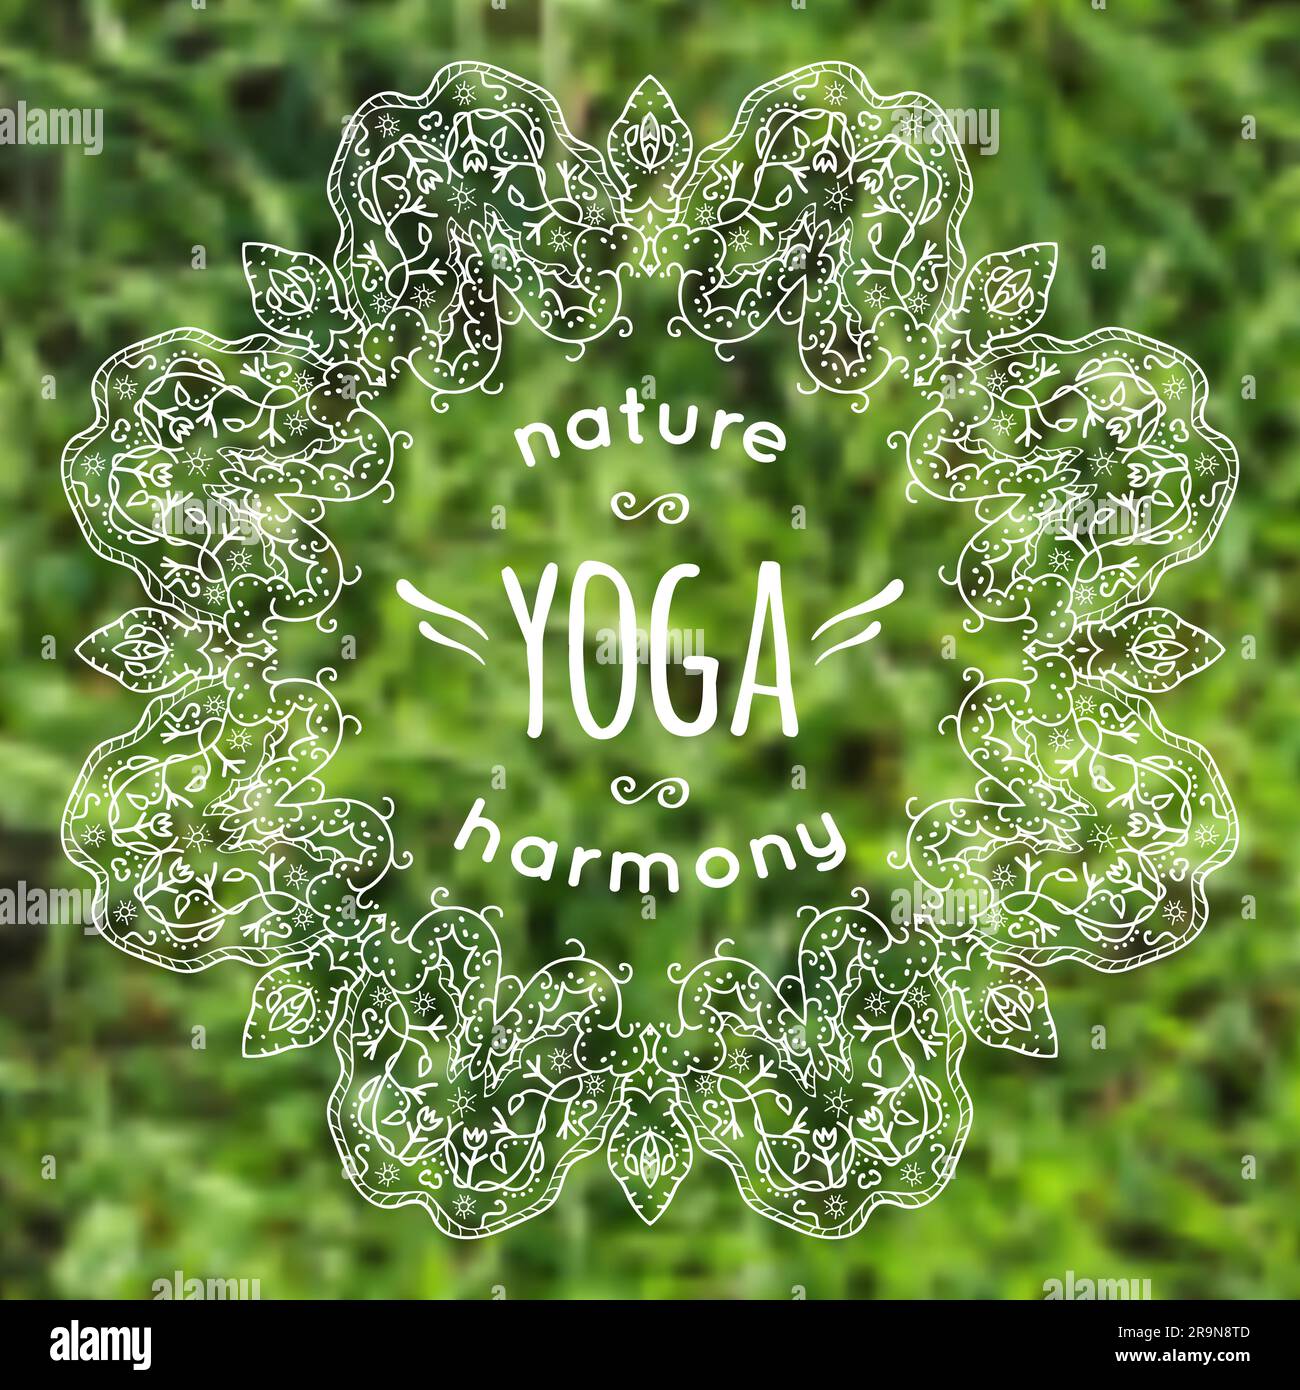 Vector illustration with mandala and yoga label on blurred grass ...